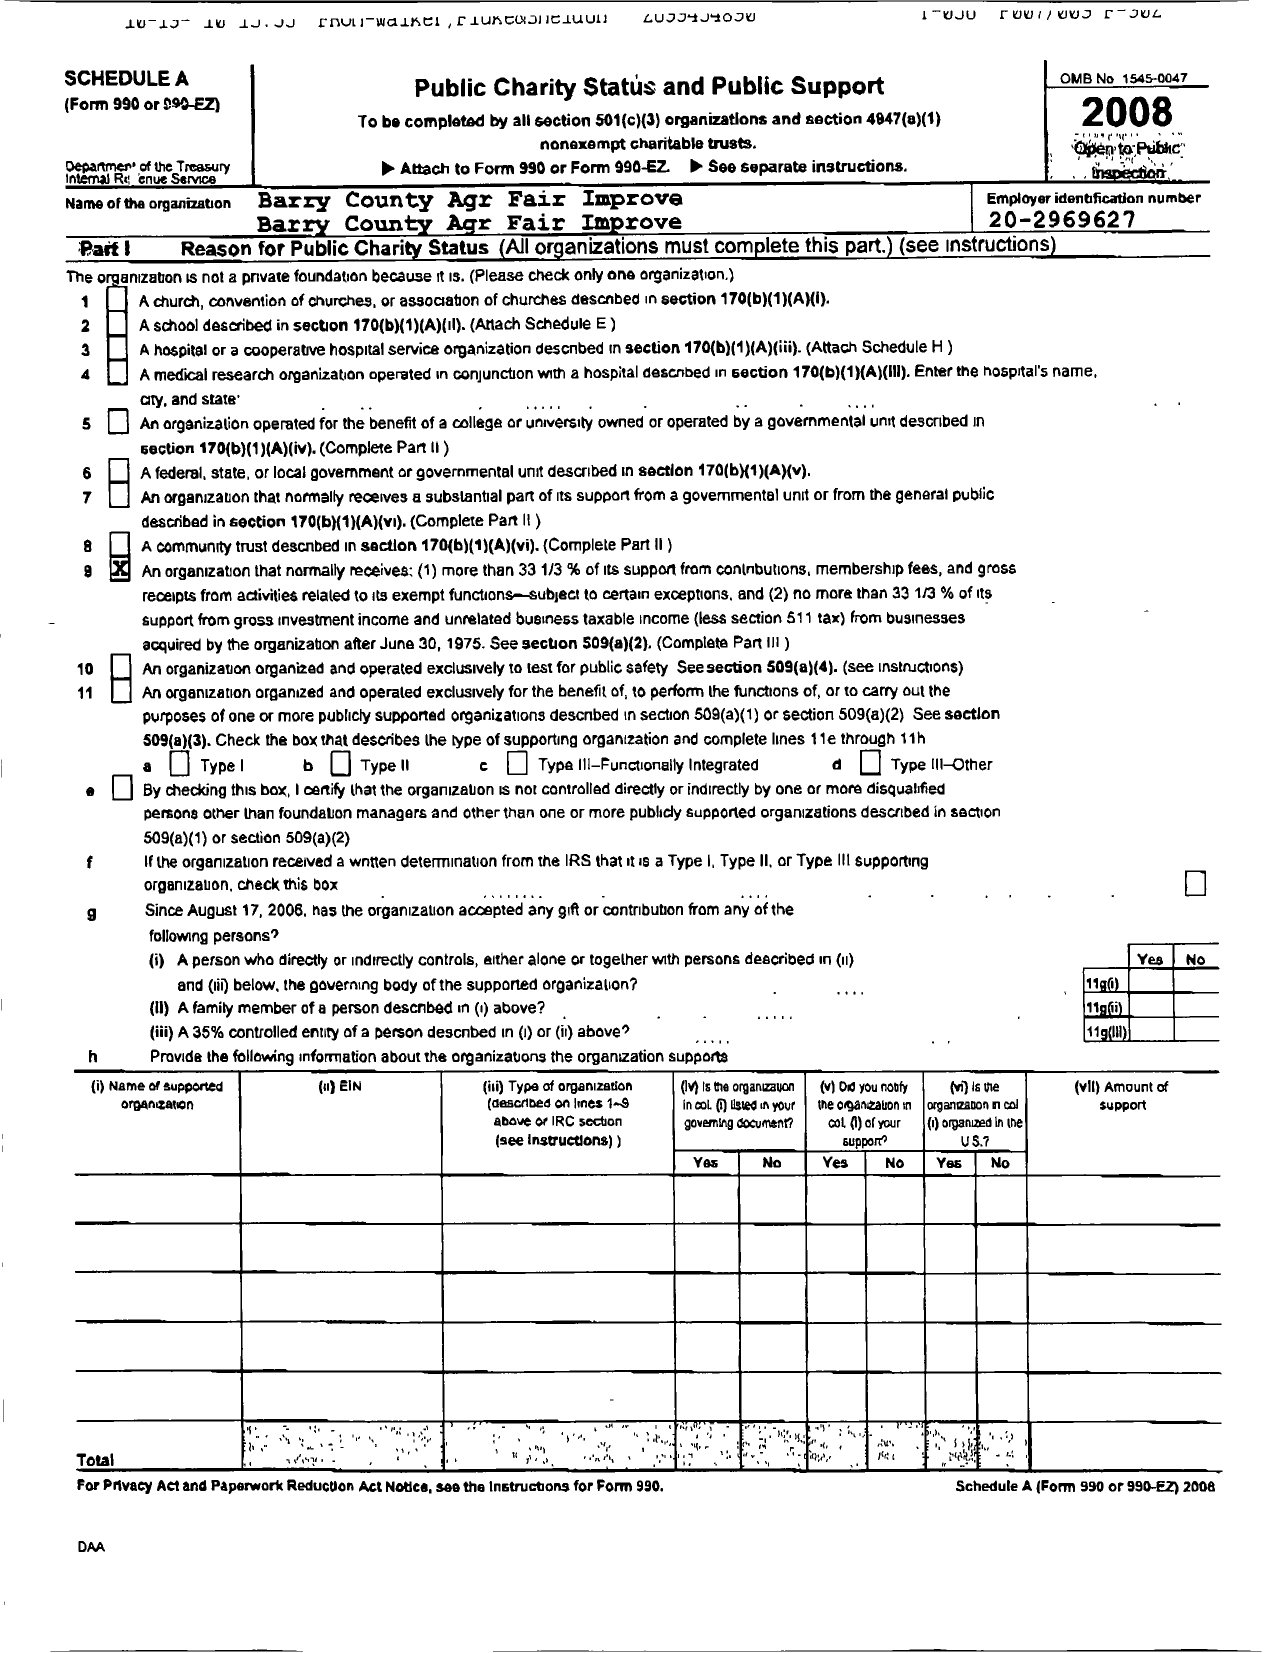 Image of first page of 2008 Form 990ER for Barry County Agr Fair Improve